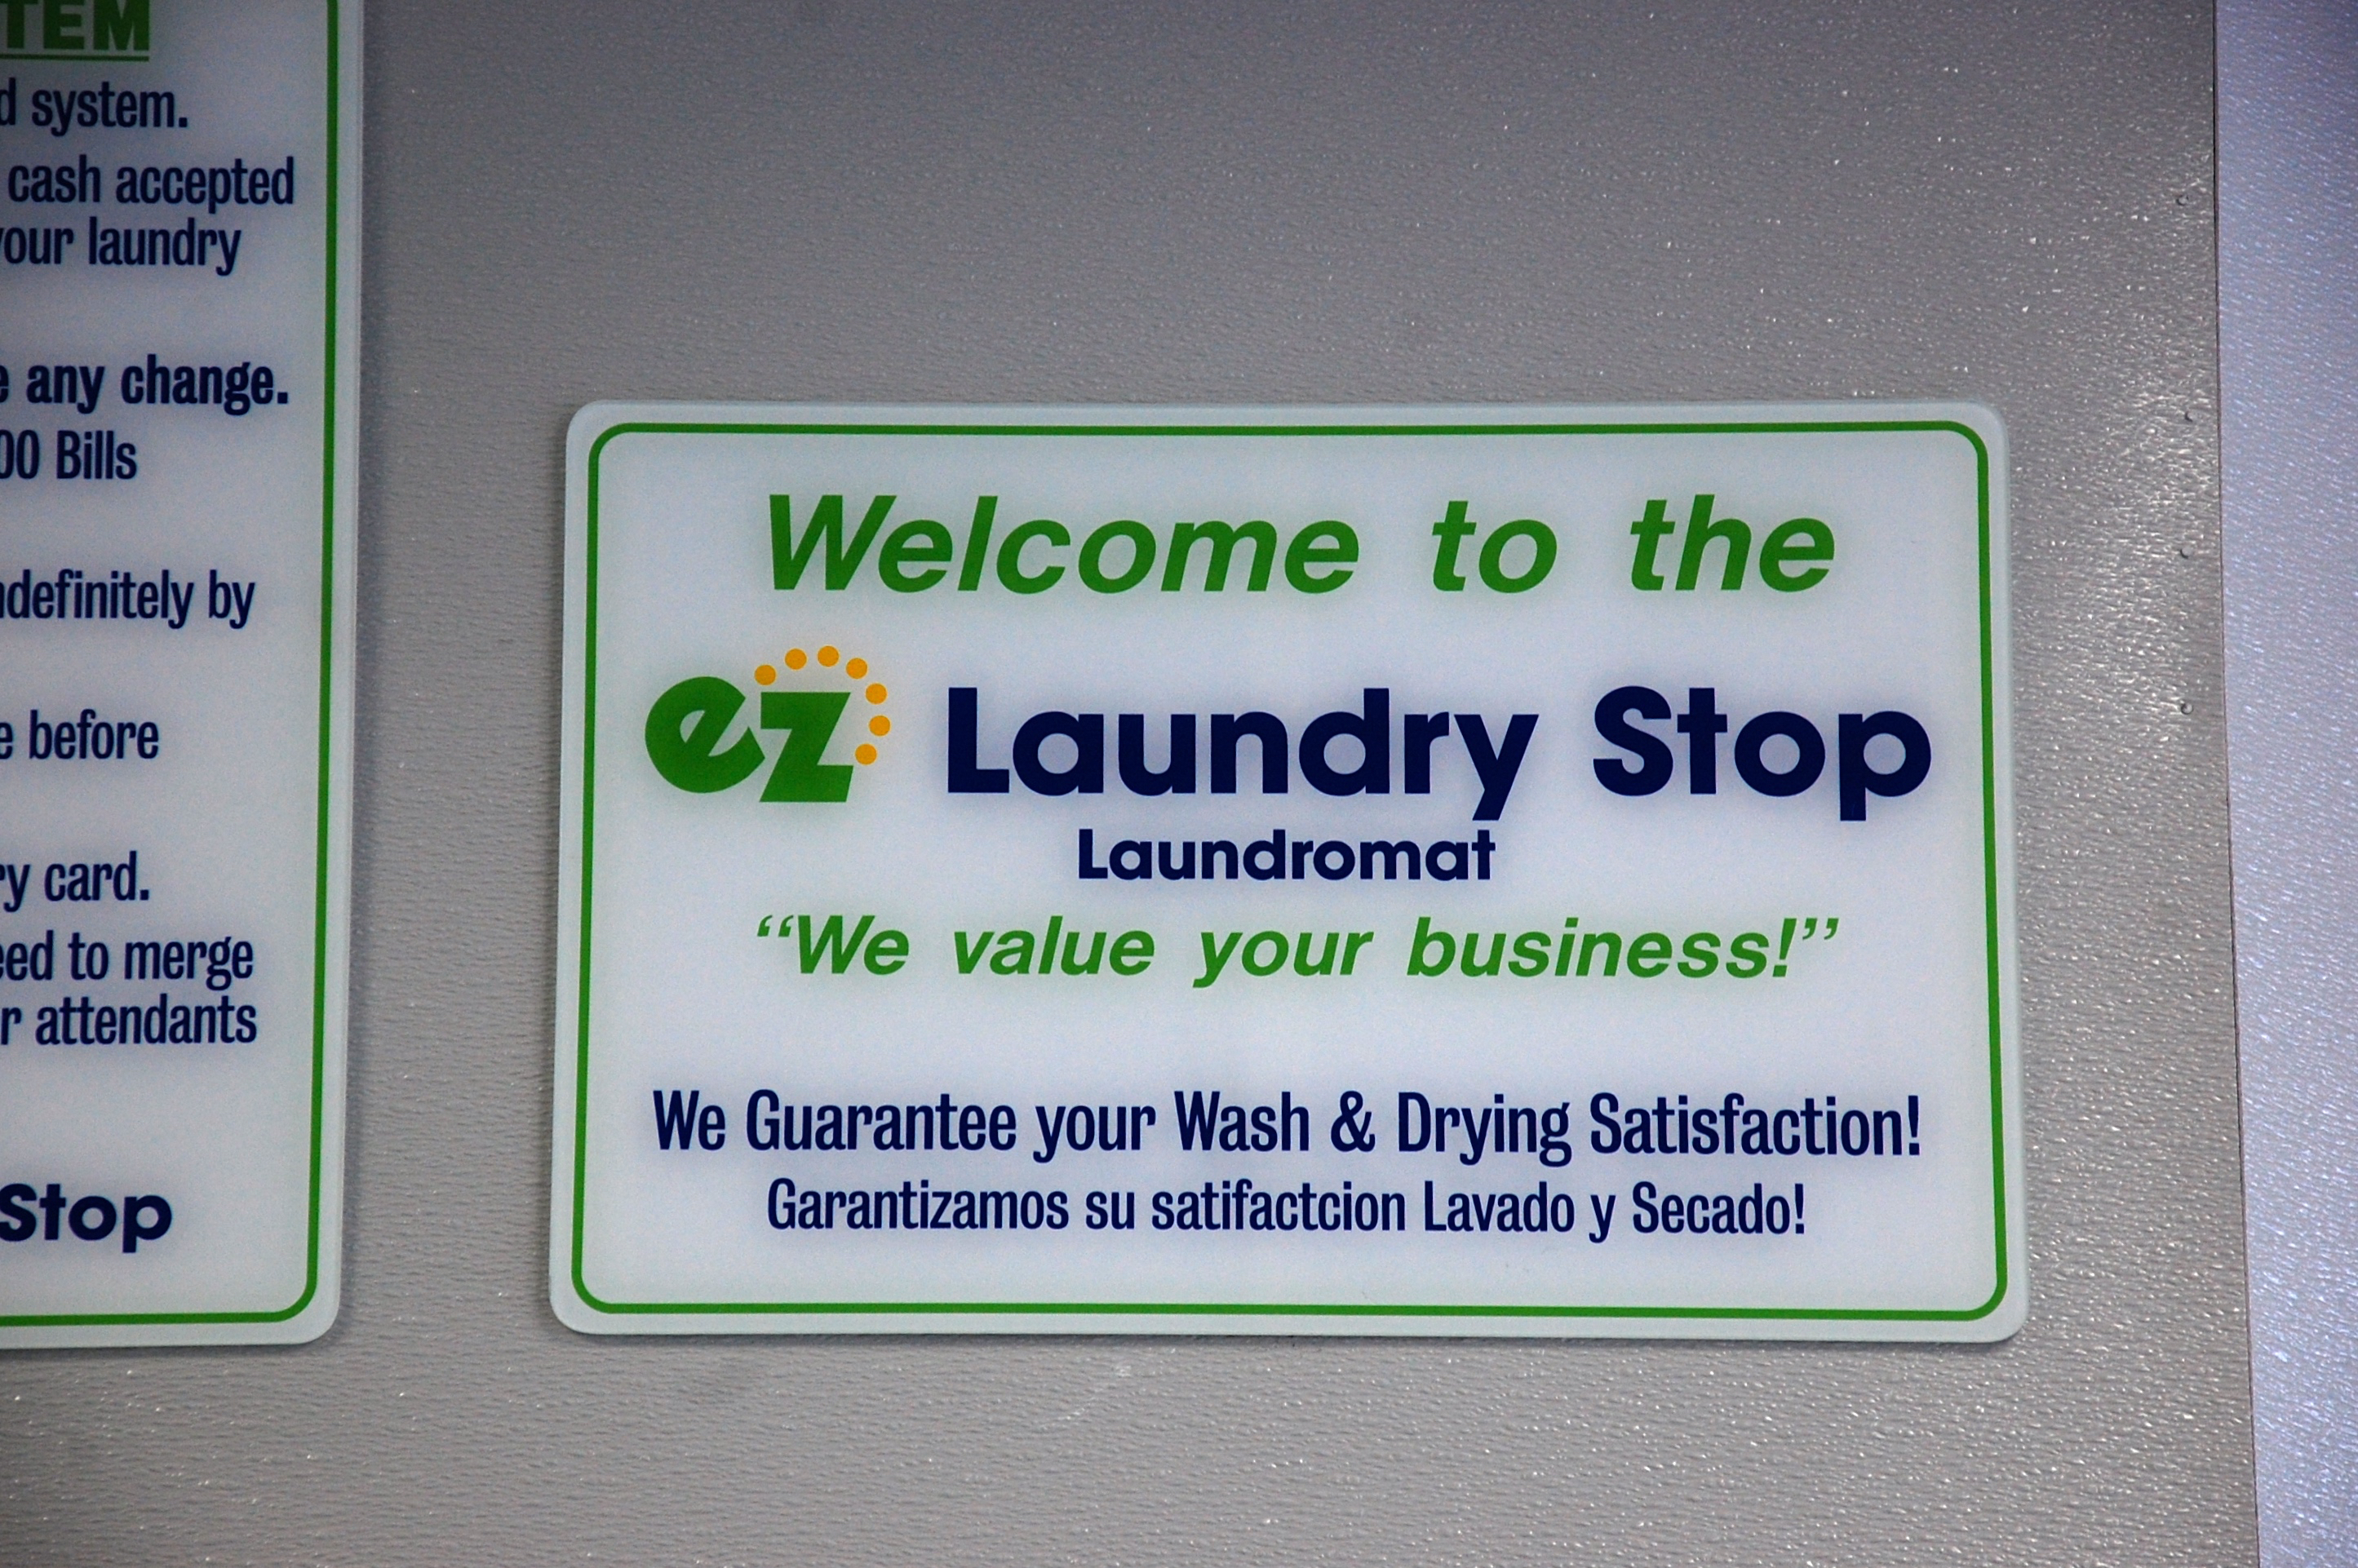 A basic promise that every Laundromat should make - 100% satisfaction. Thumbnail